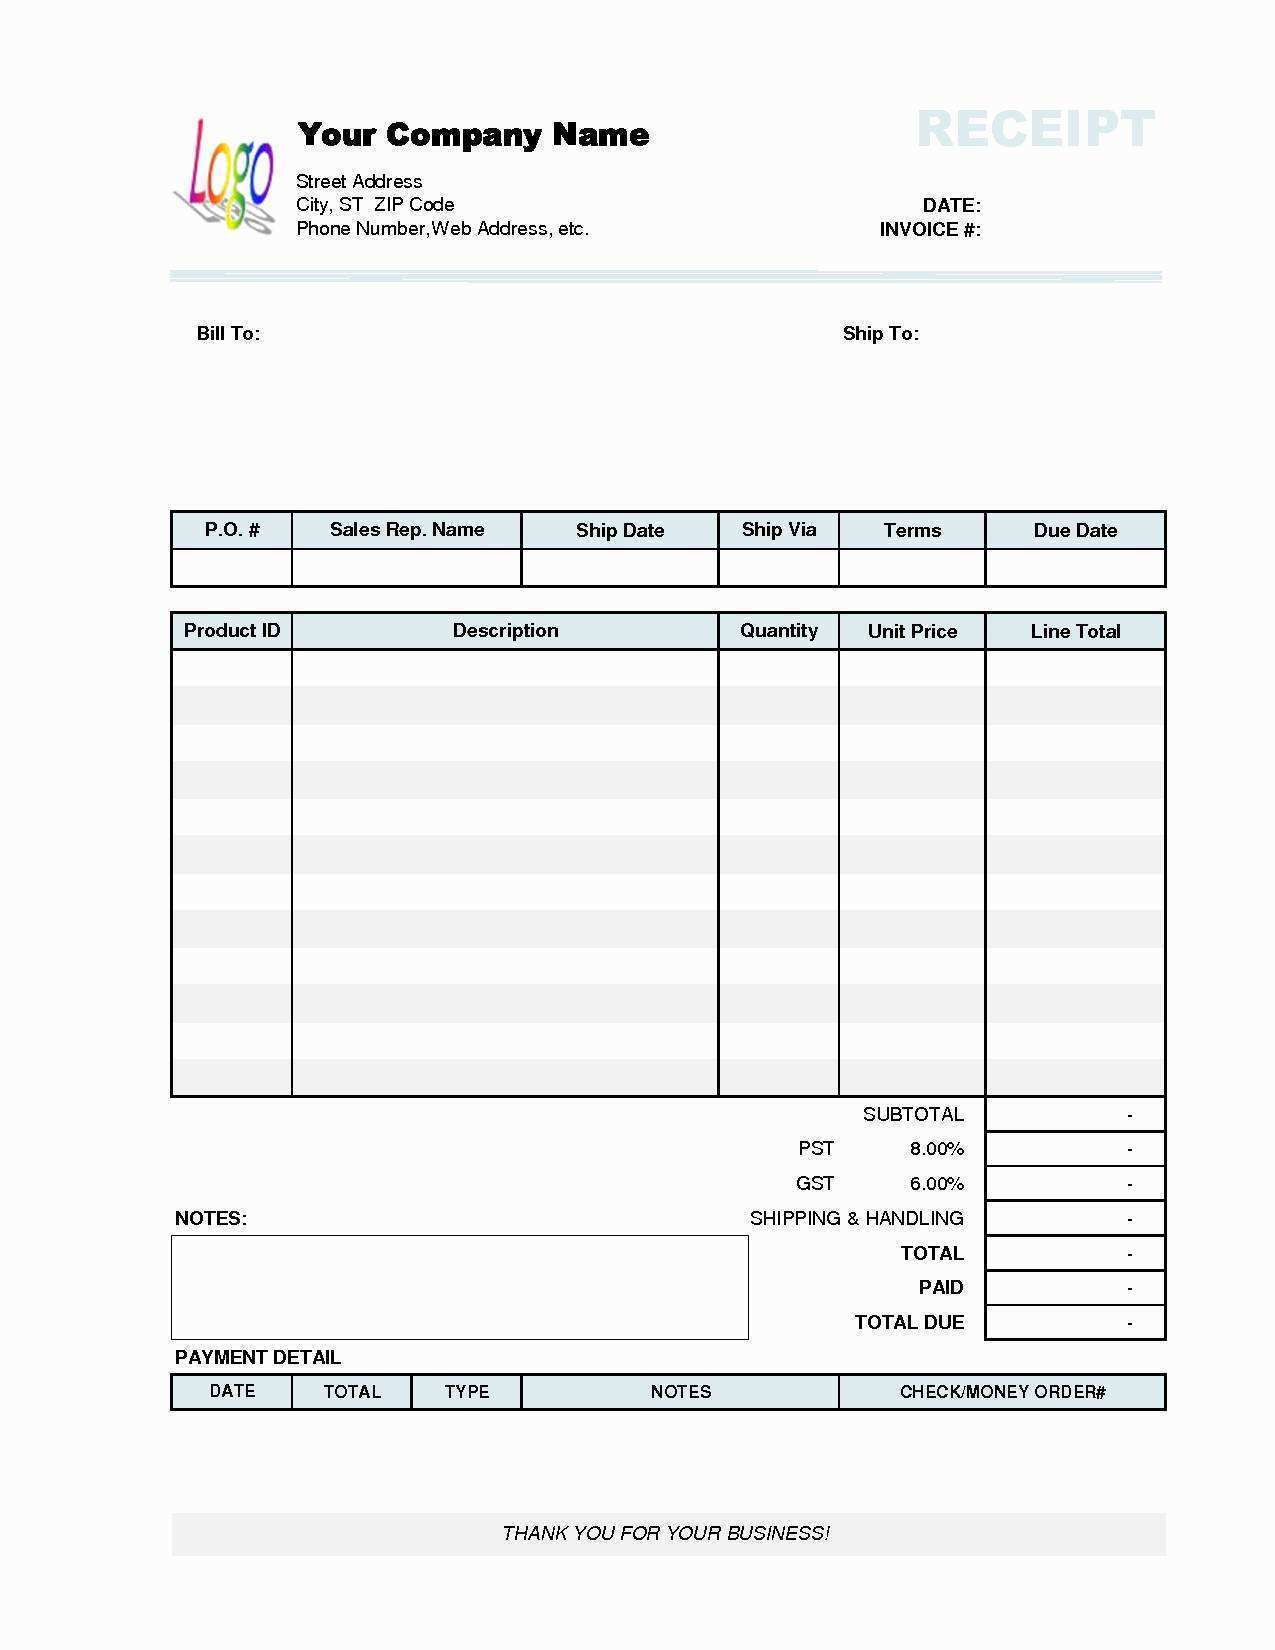 printable-lawn-care-invoice-template-printable-templates